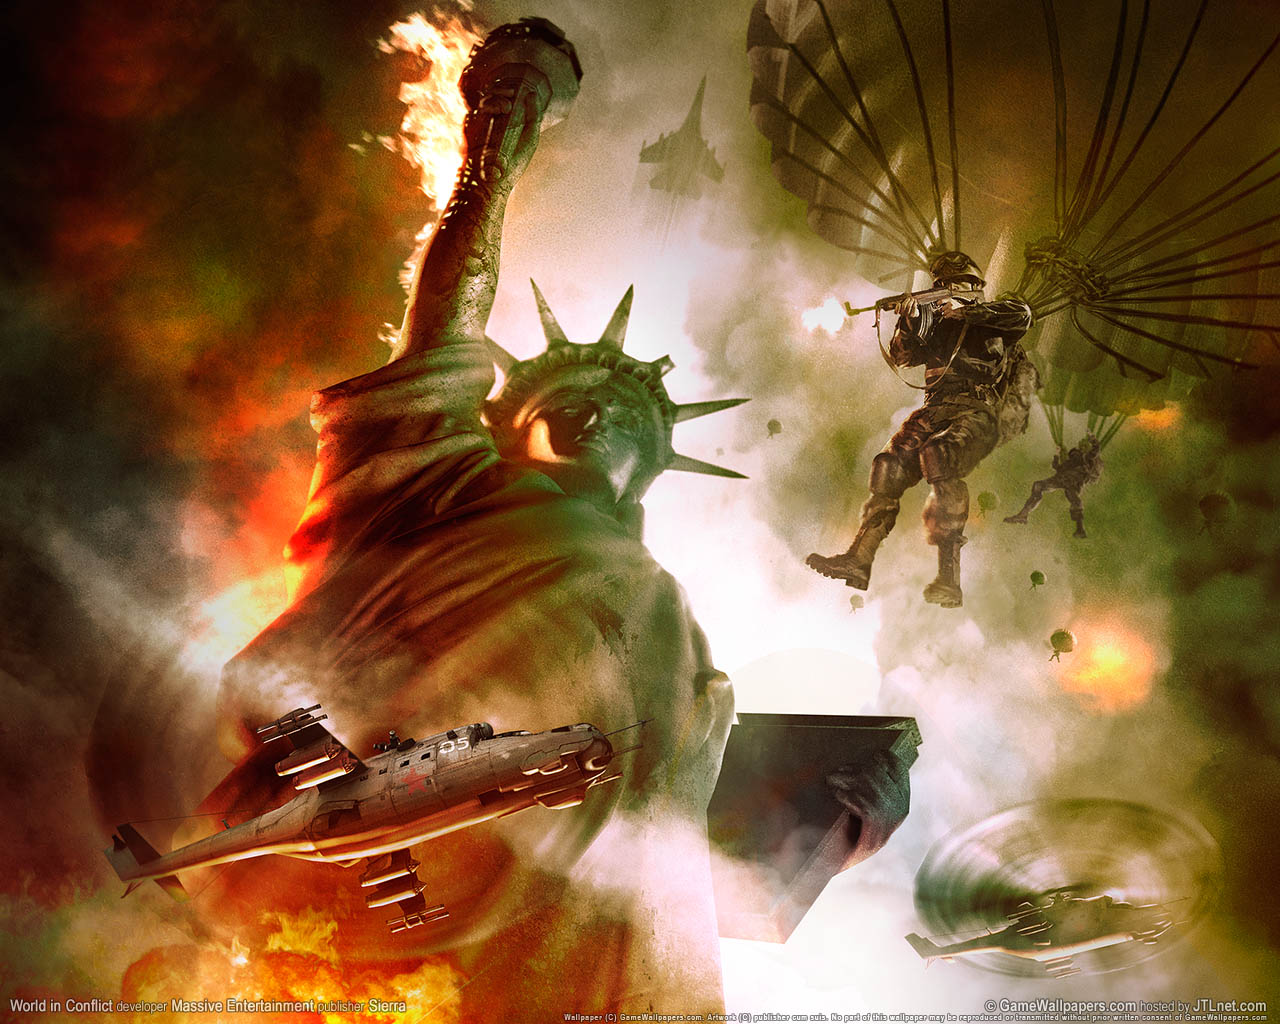 World in Conflict fond d'cran 01 1280x1024